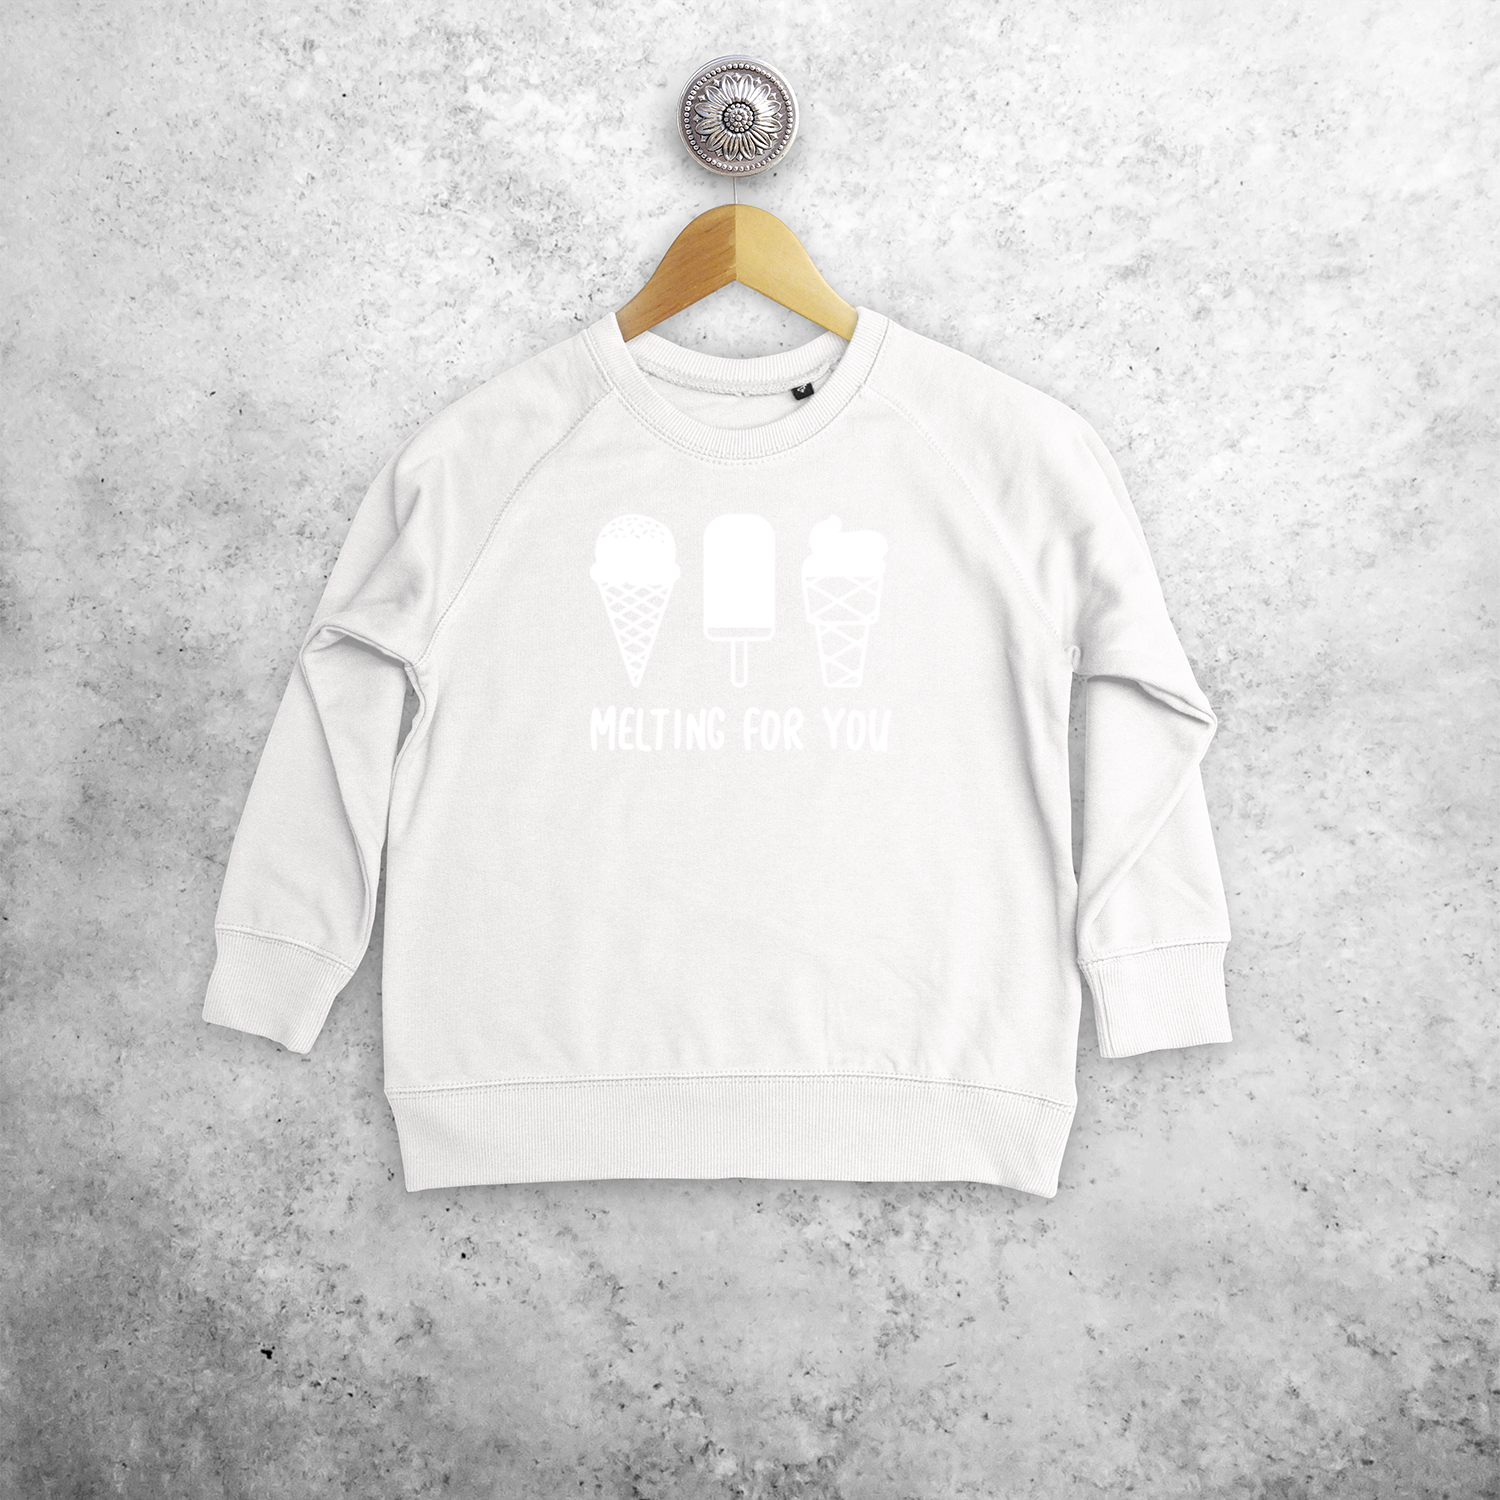 'Melting for you' magic kids sweater